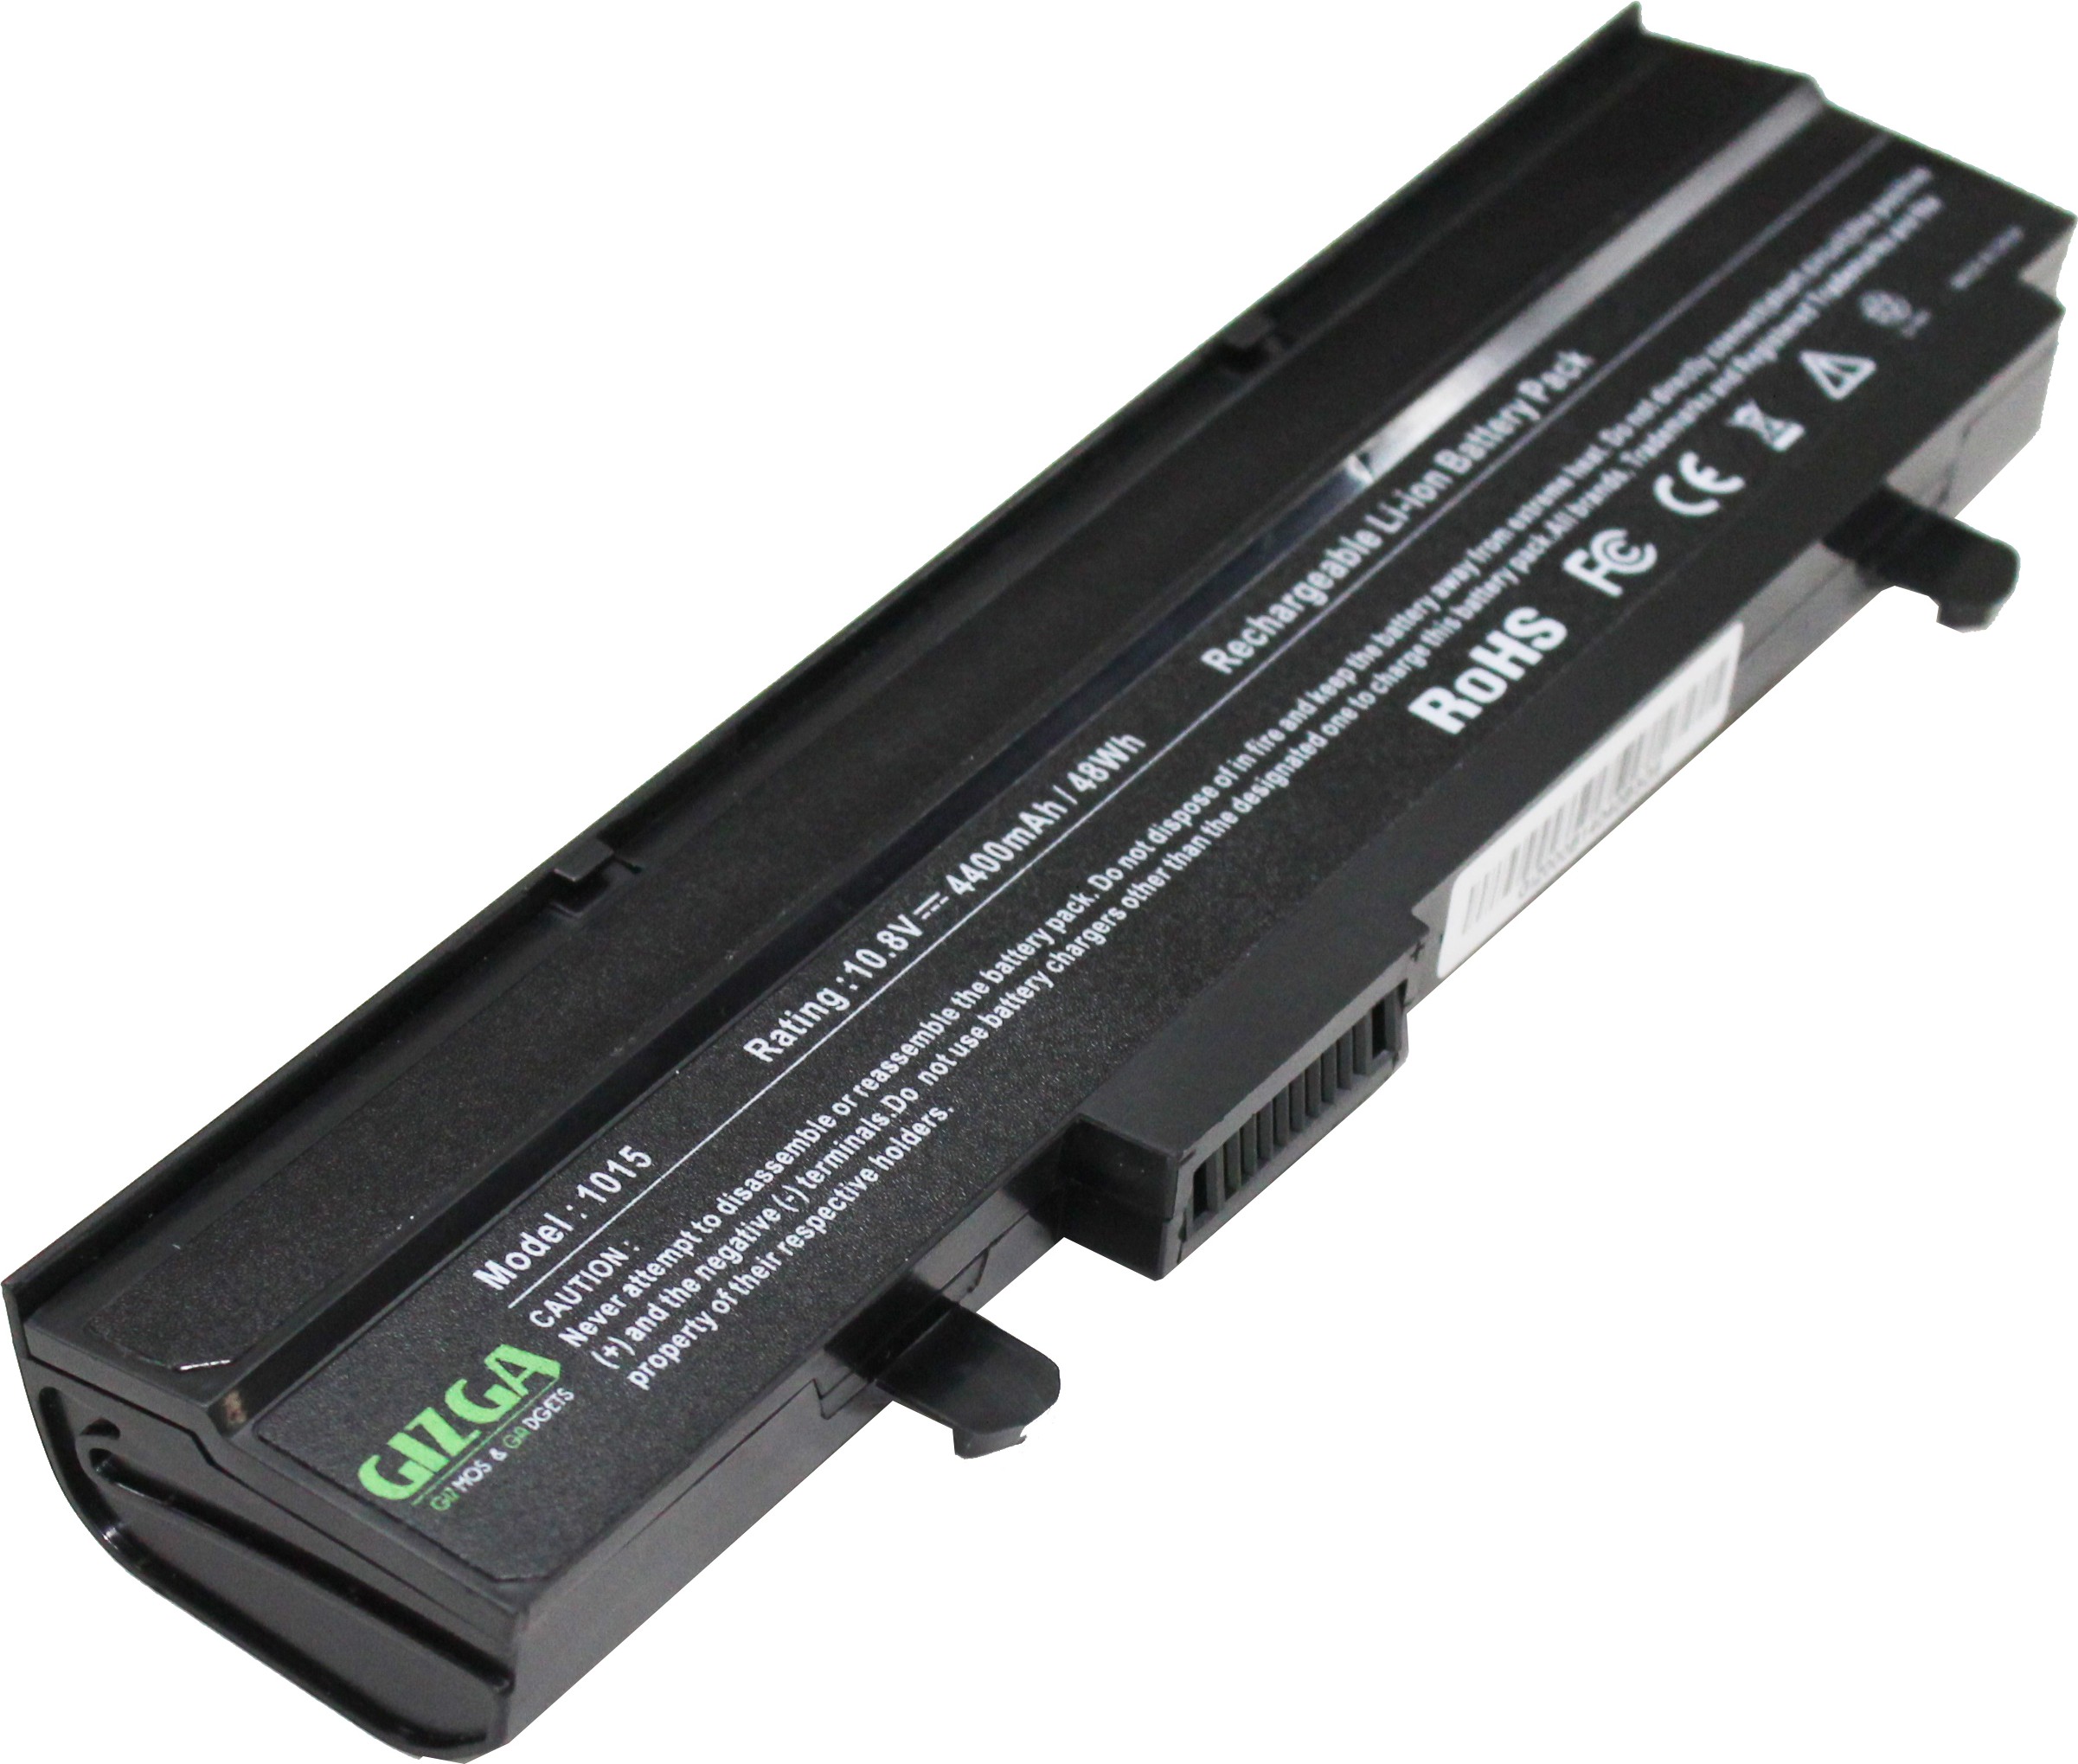 Battery pc. ASUS a32-1015. ASUS a32 аккумулятор. Аккумуляторная батарея ASUS a22-700 Eee PC 700. PS 1010 ASUS аккумулятор.